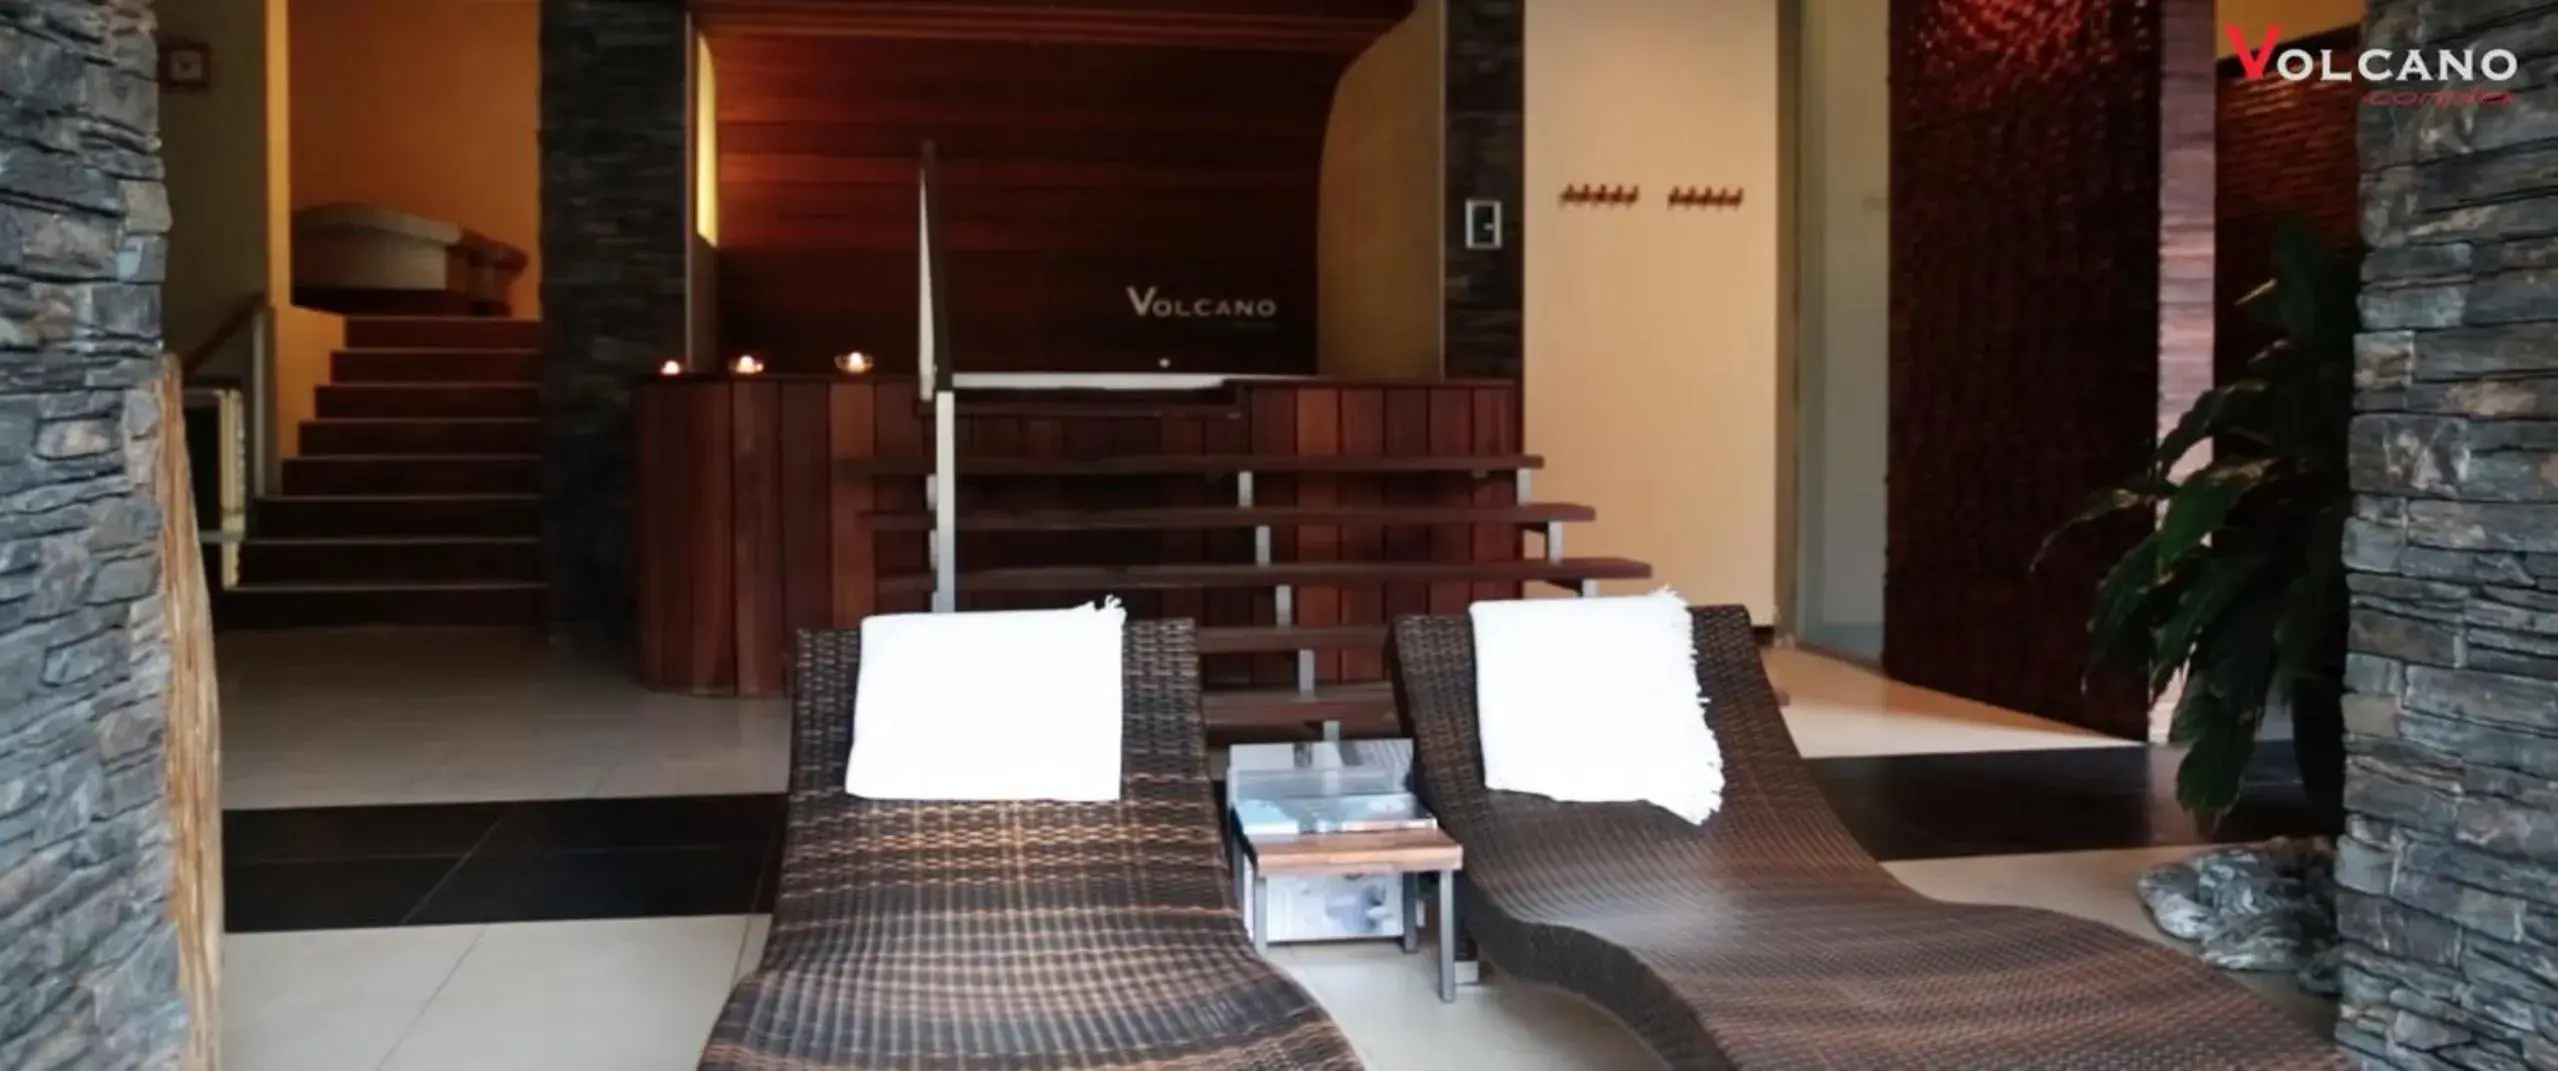 Spa and wellness centre/facilities in Volcano Spa Hotel